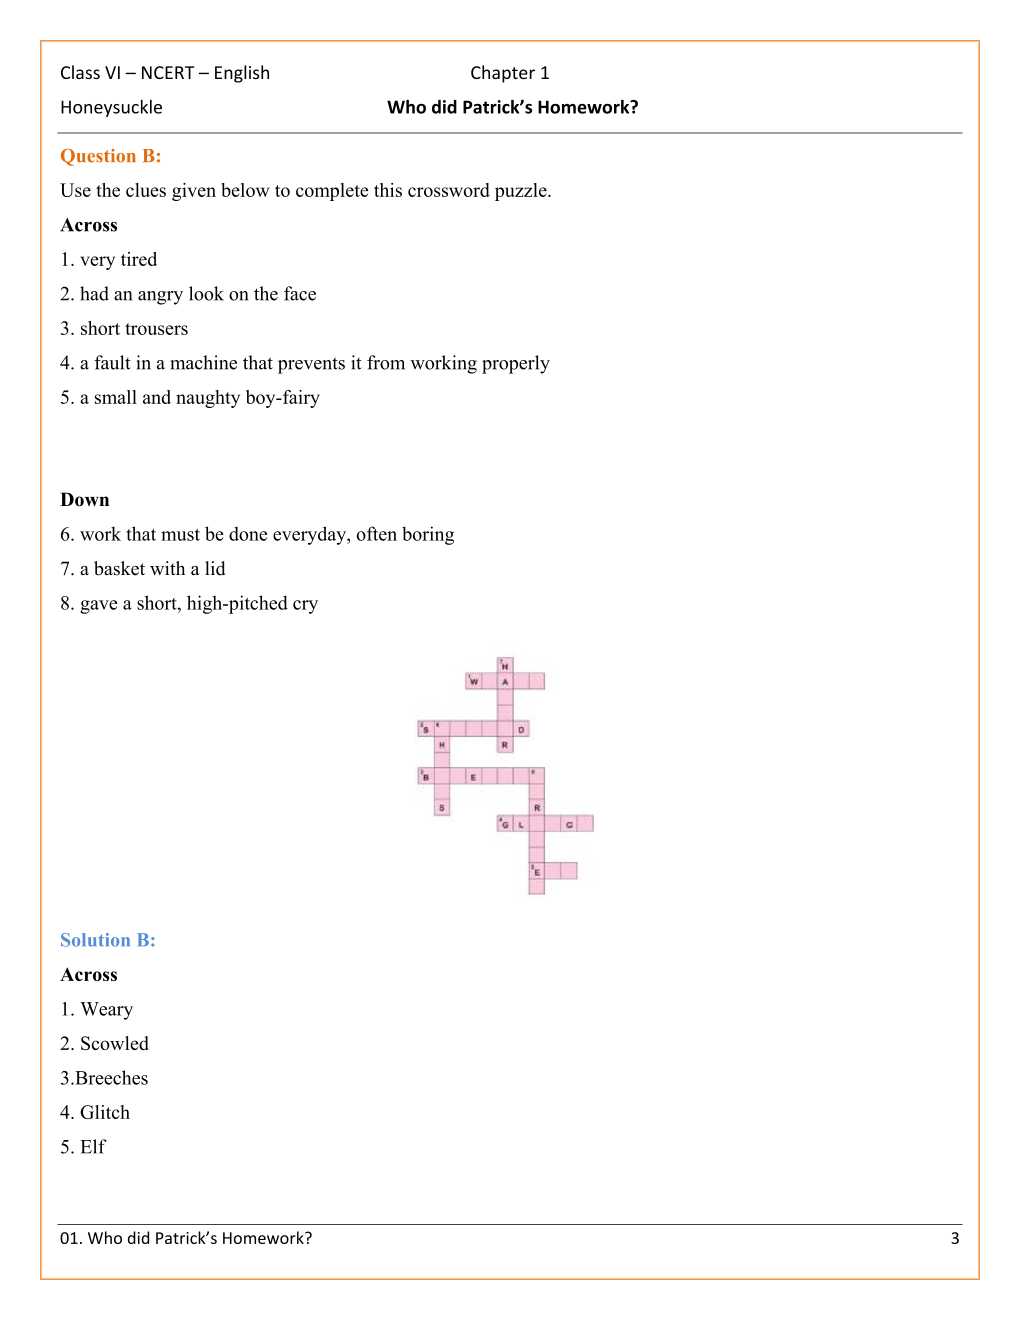 NCERT Solutions For Class 6 English Honeysuckle Chapter 1